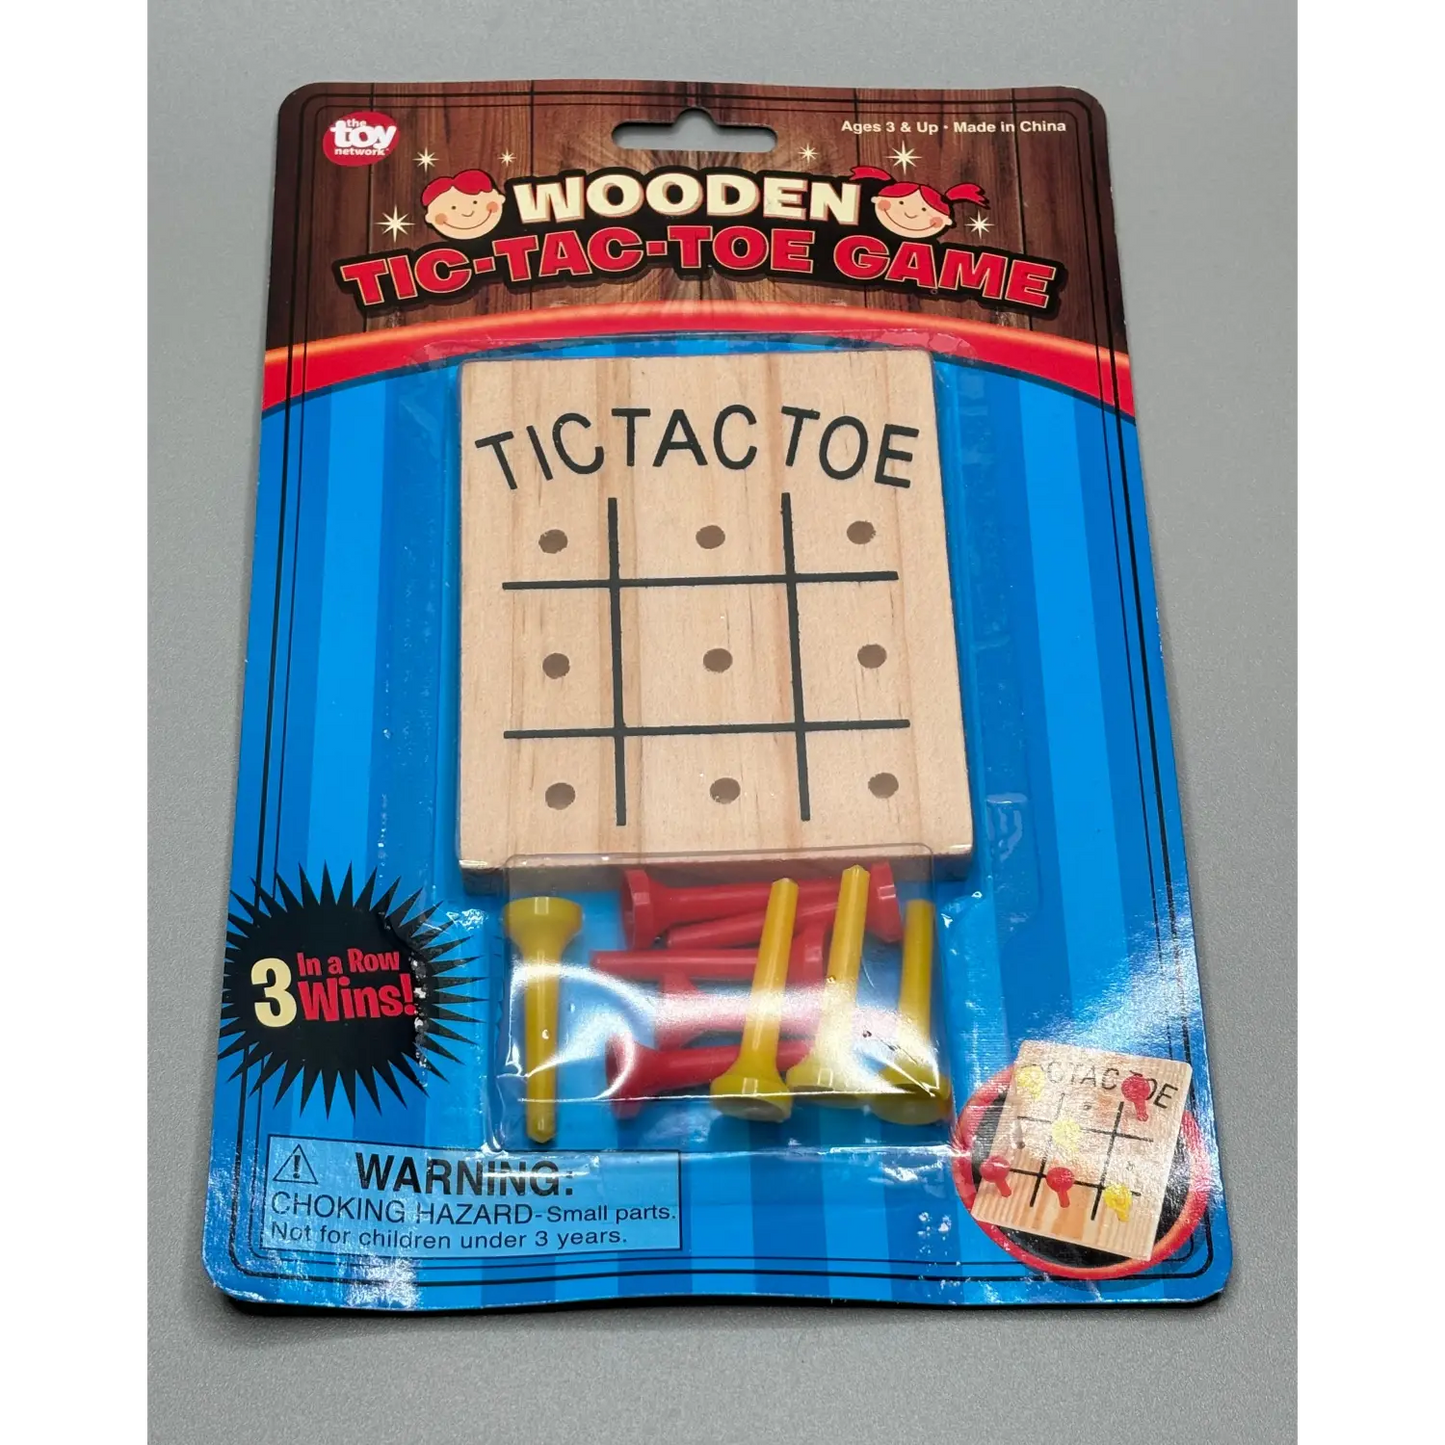 Classic Wooden Tic-Tac-Toe Game with Pegs